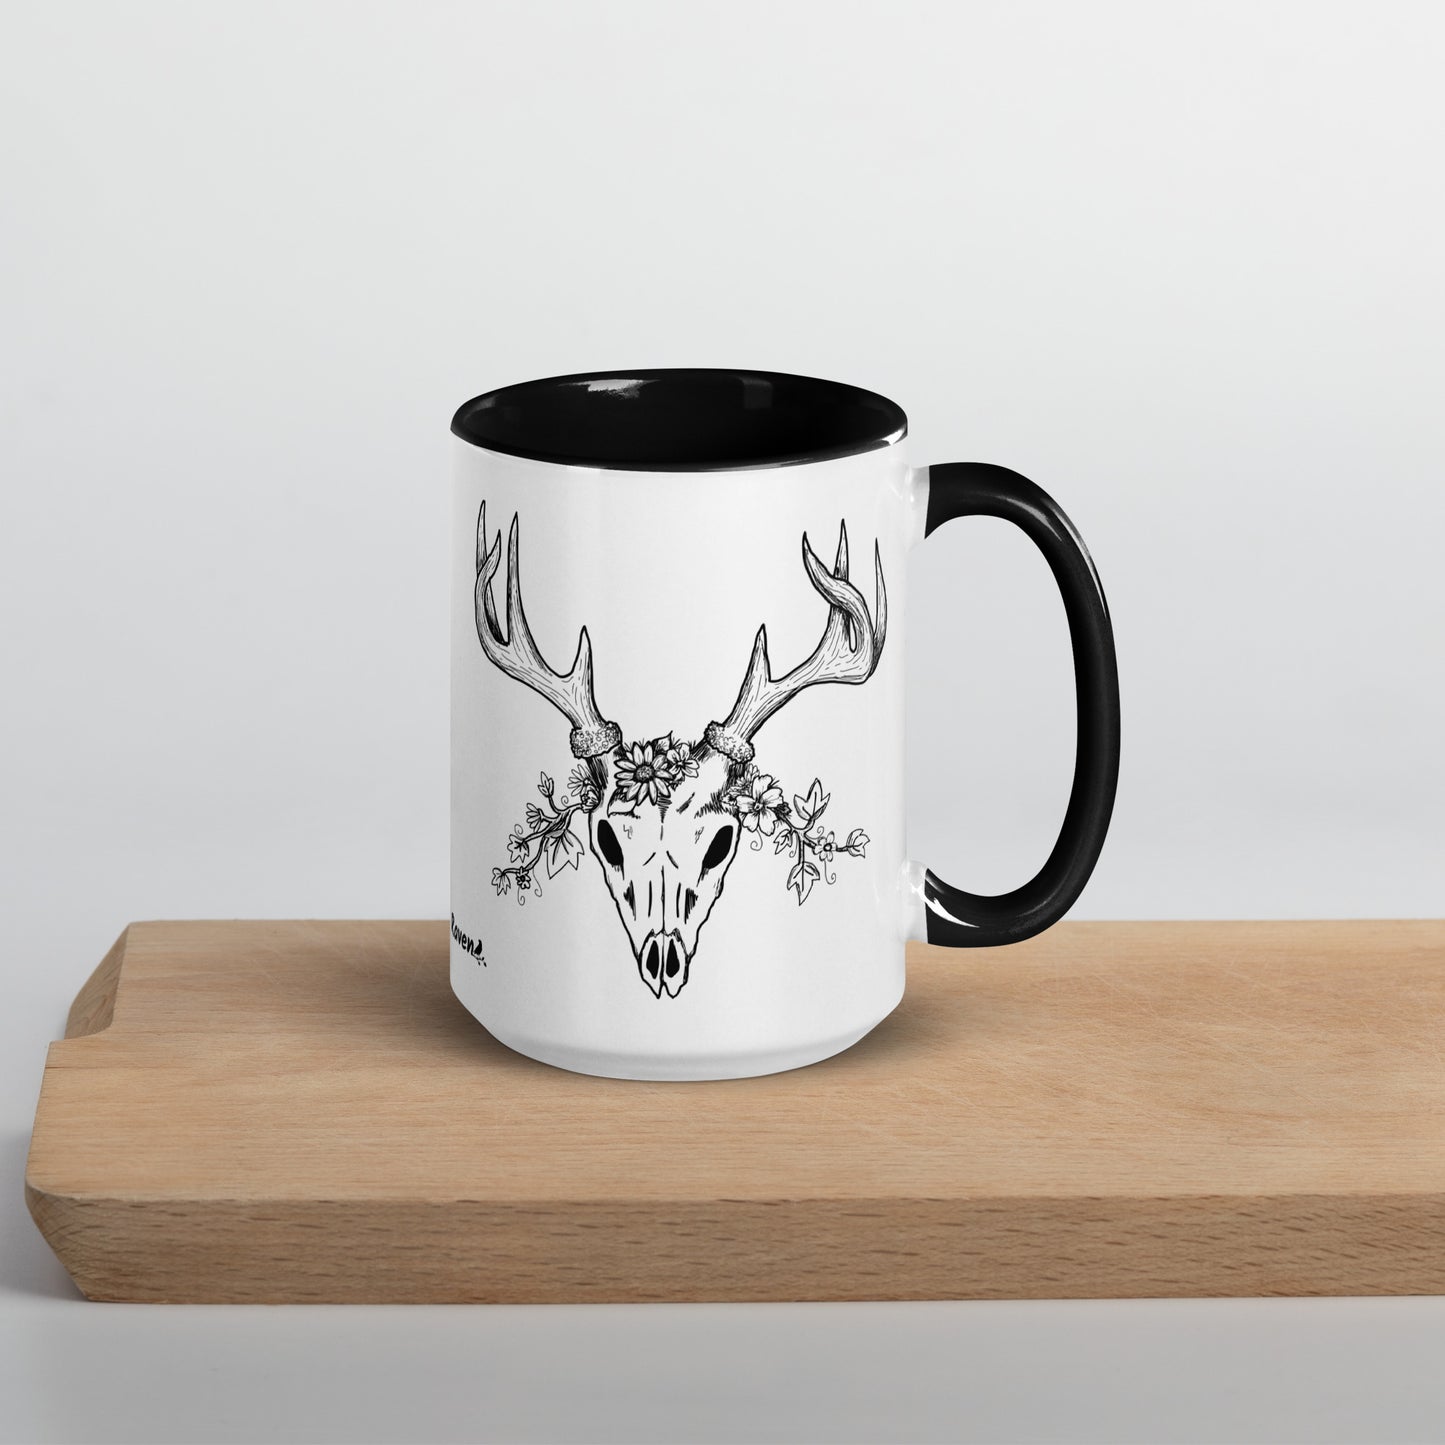 15 ounce ceramic mug with hand illustrated deer skull wreathed in flowers. Double-sided design. Mug has black rim, handle, and inside. Shown sitting on wooden cutting board with handle facing right.